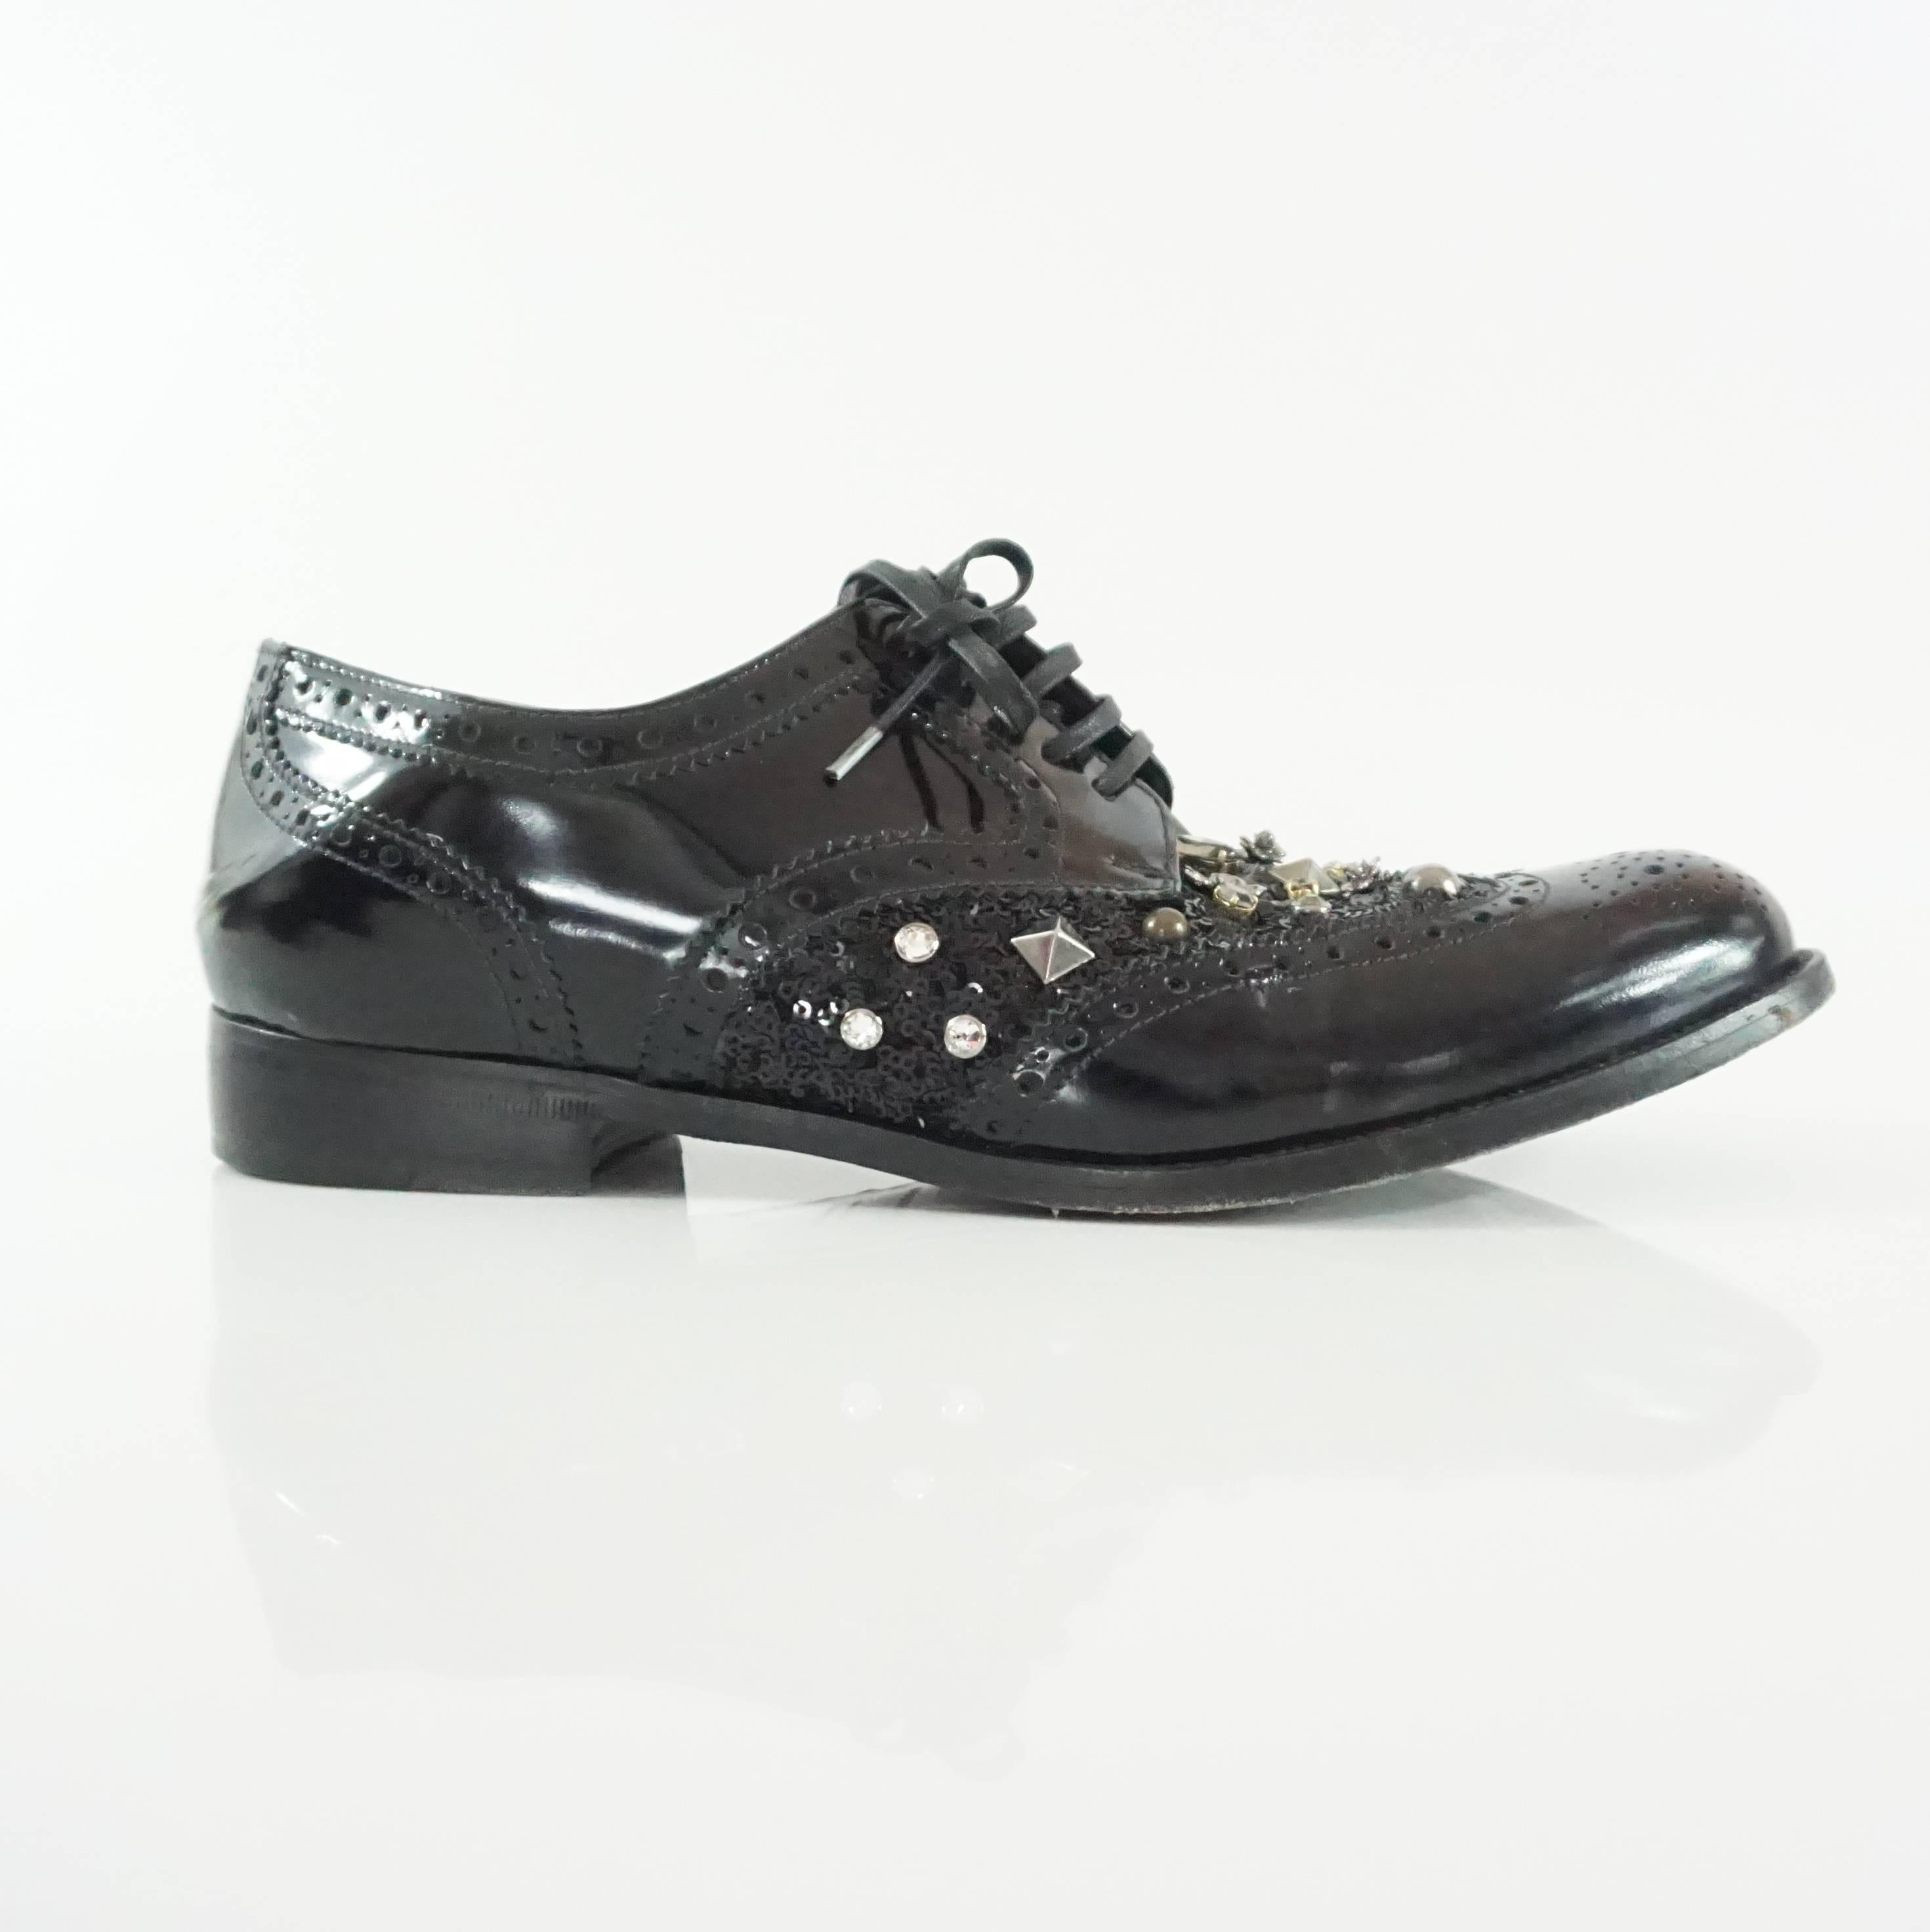 These stunning Dolce & Gabbana black lace-up oxfords are a fabulous twist on a classic style. They have sequin encrusting with studs and rhinestones in the middle. They are in excellent condition with minimal wear to the leather and the bottom.